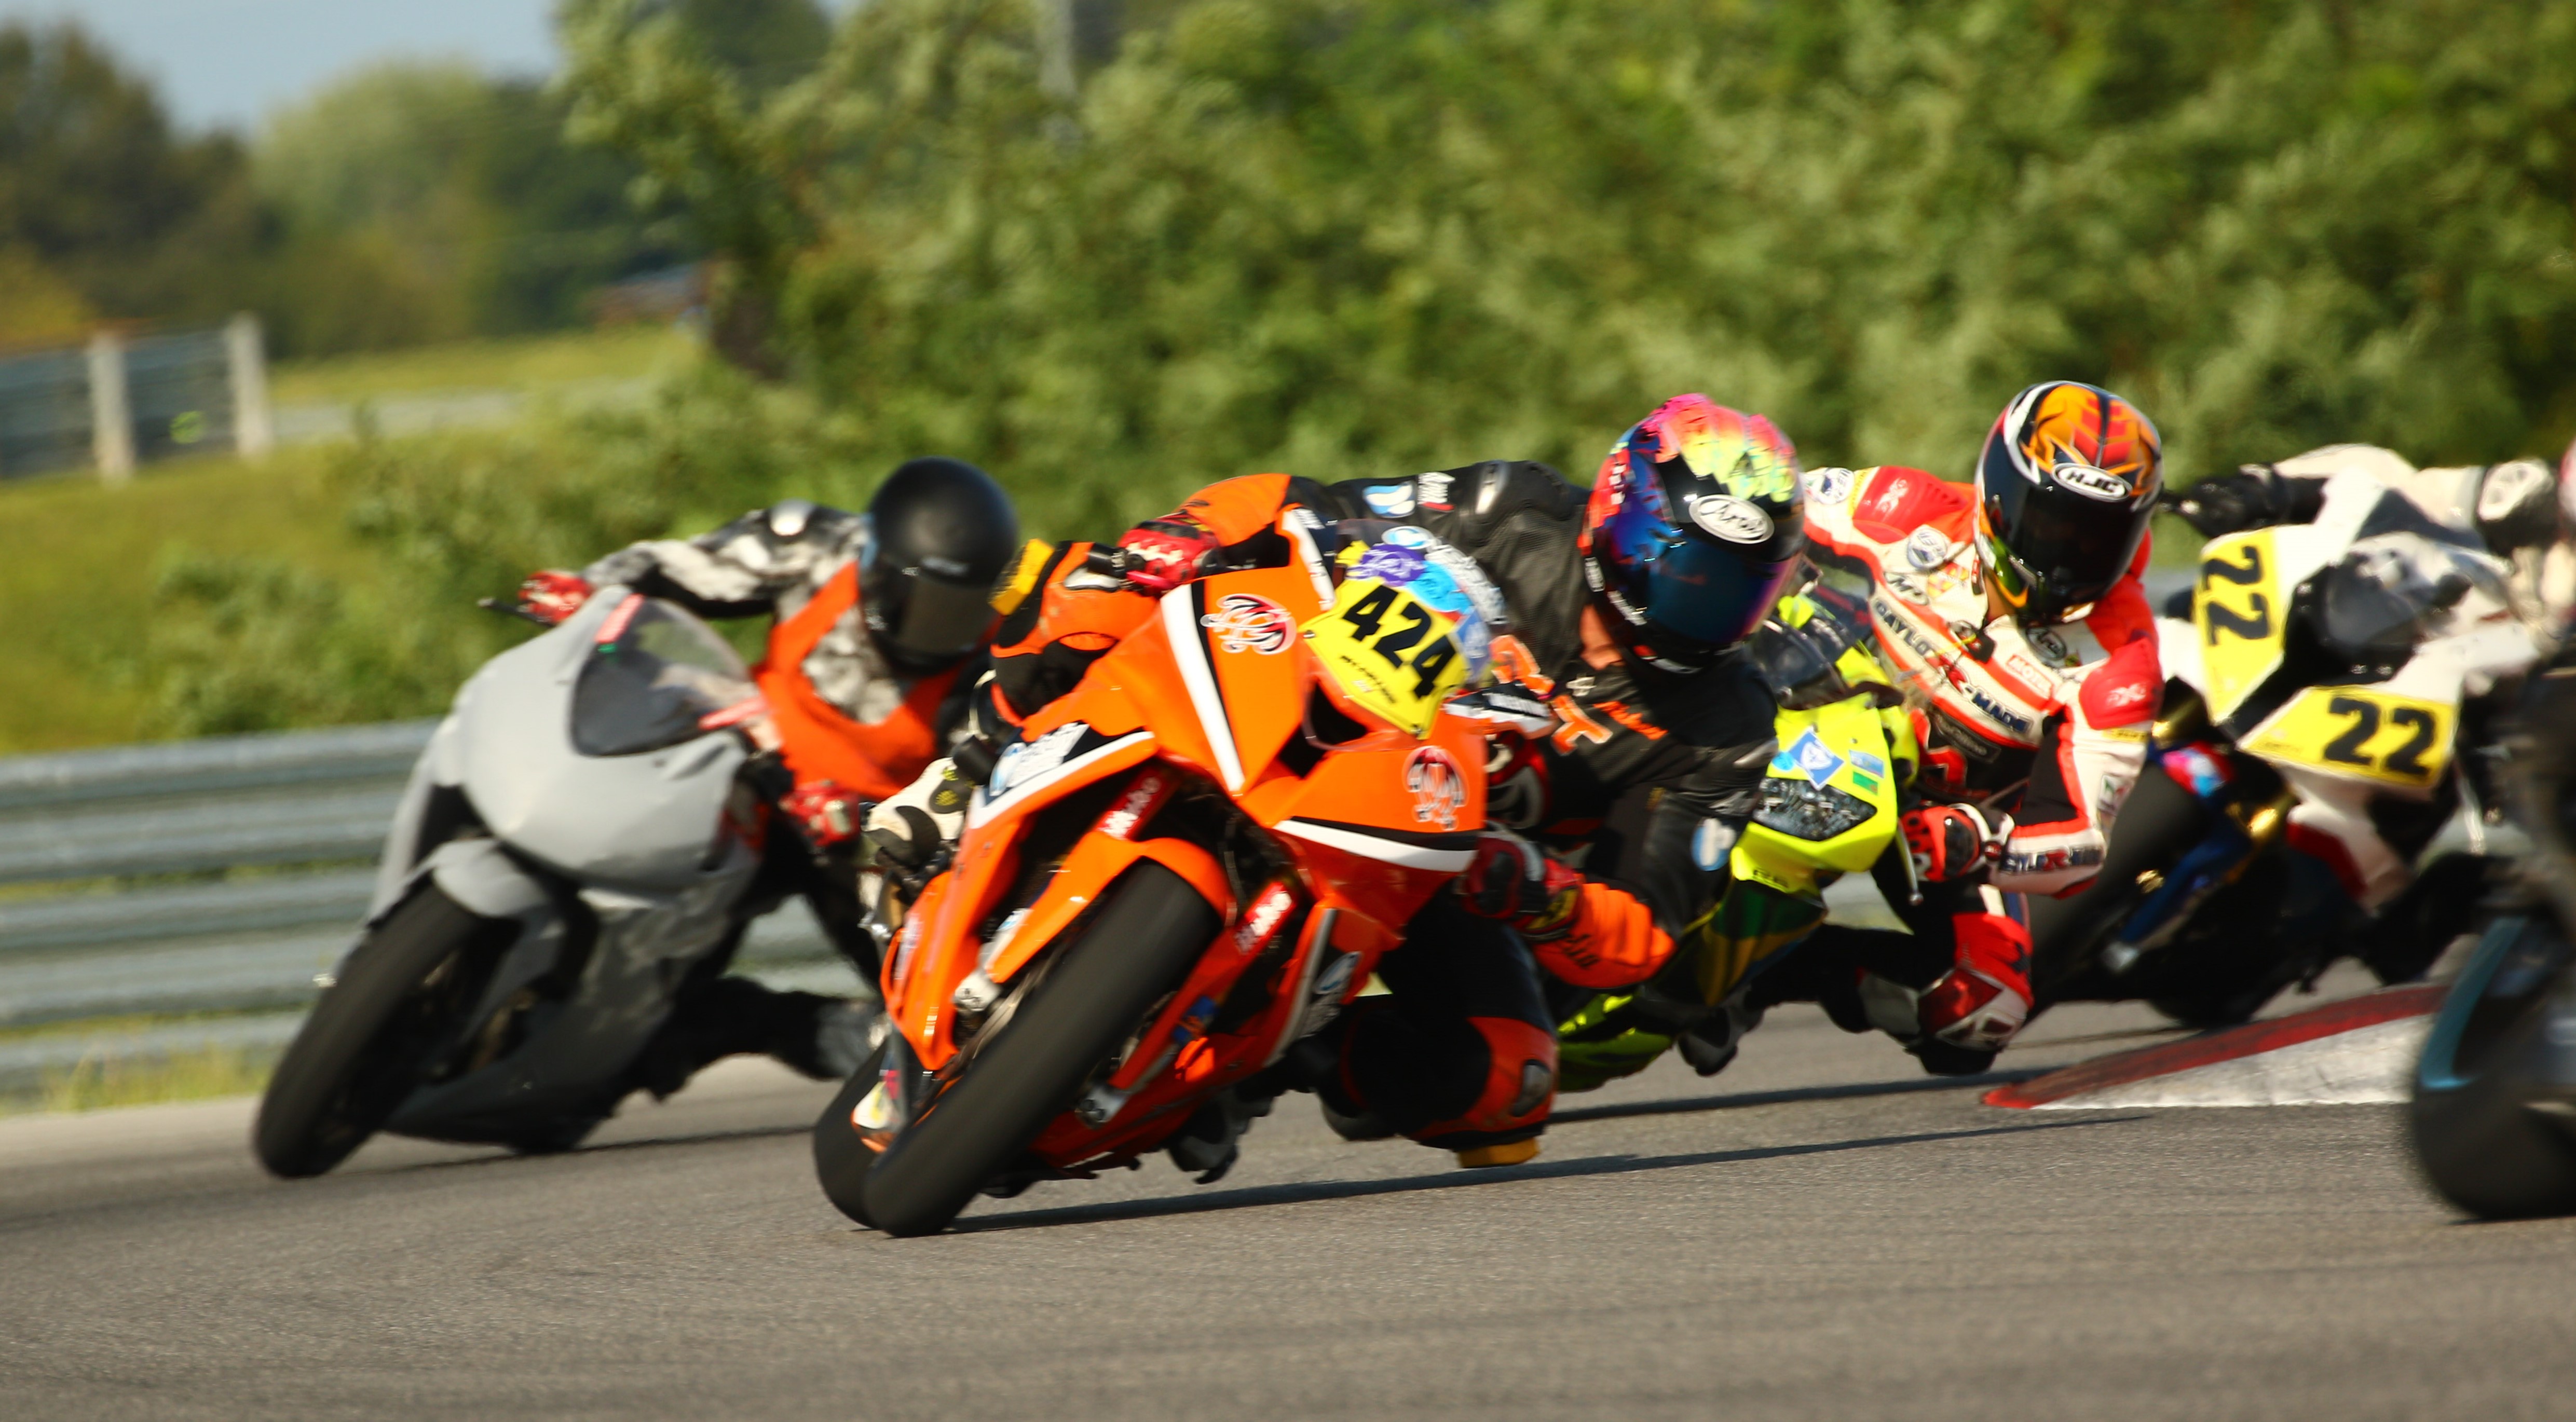 Episode 3: “KEEPING MOTORCYCLISTS SAFE ON A RACETRACK”